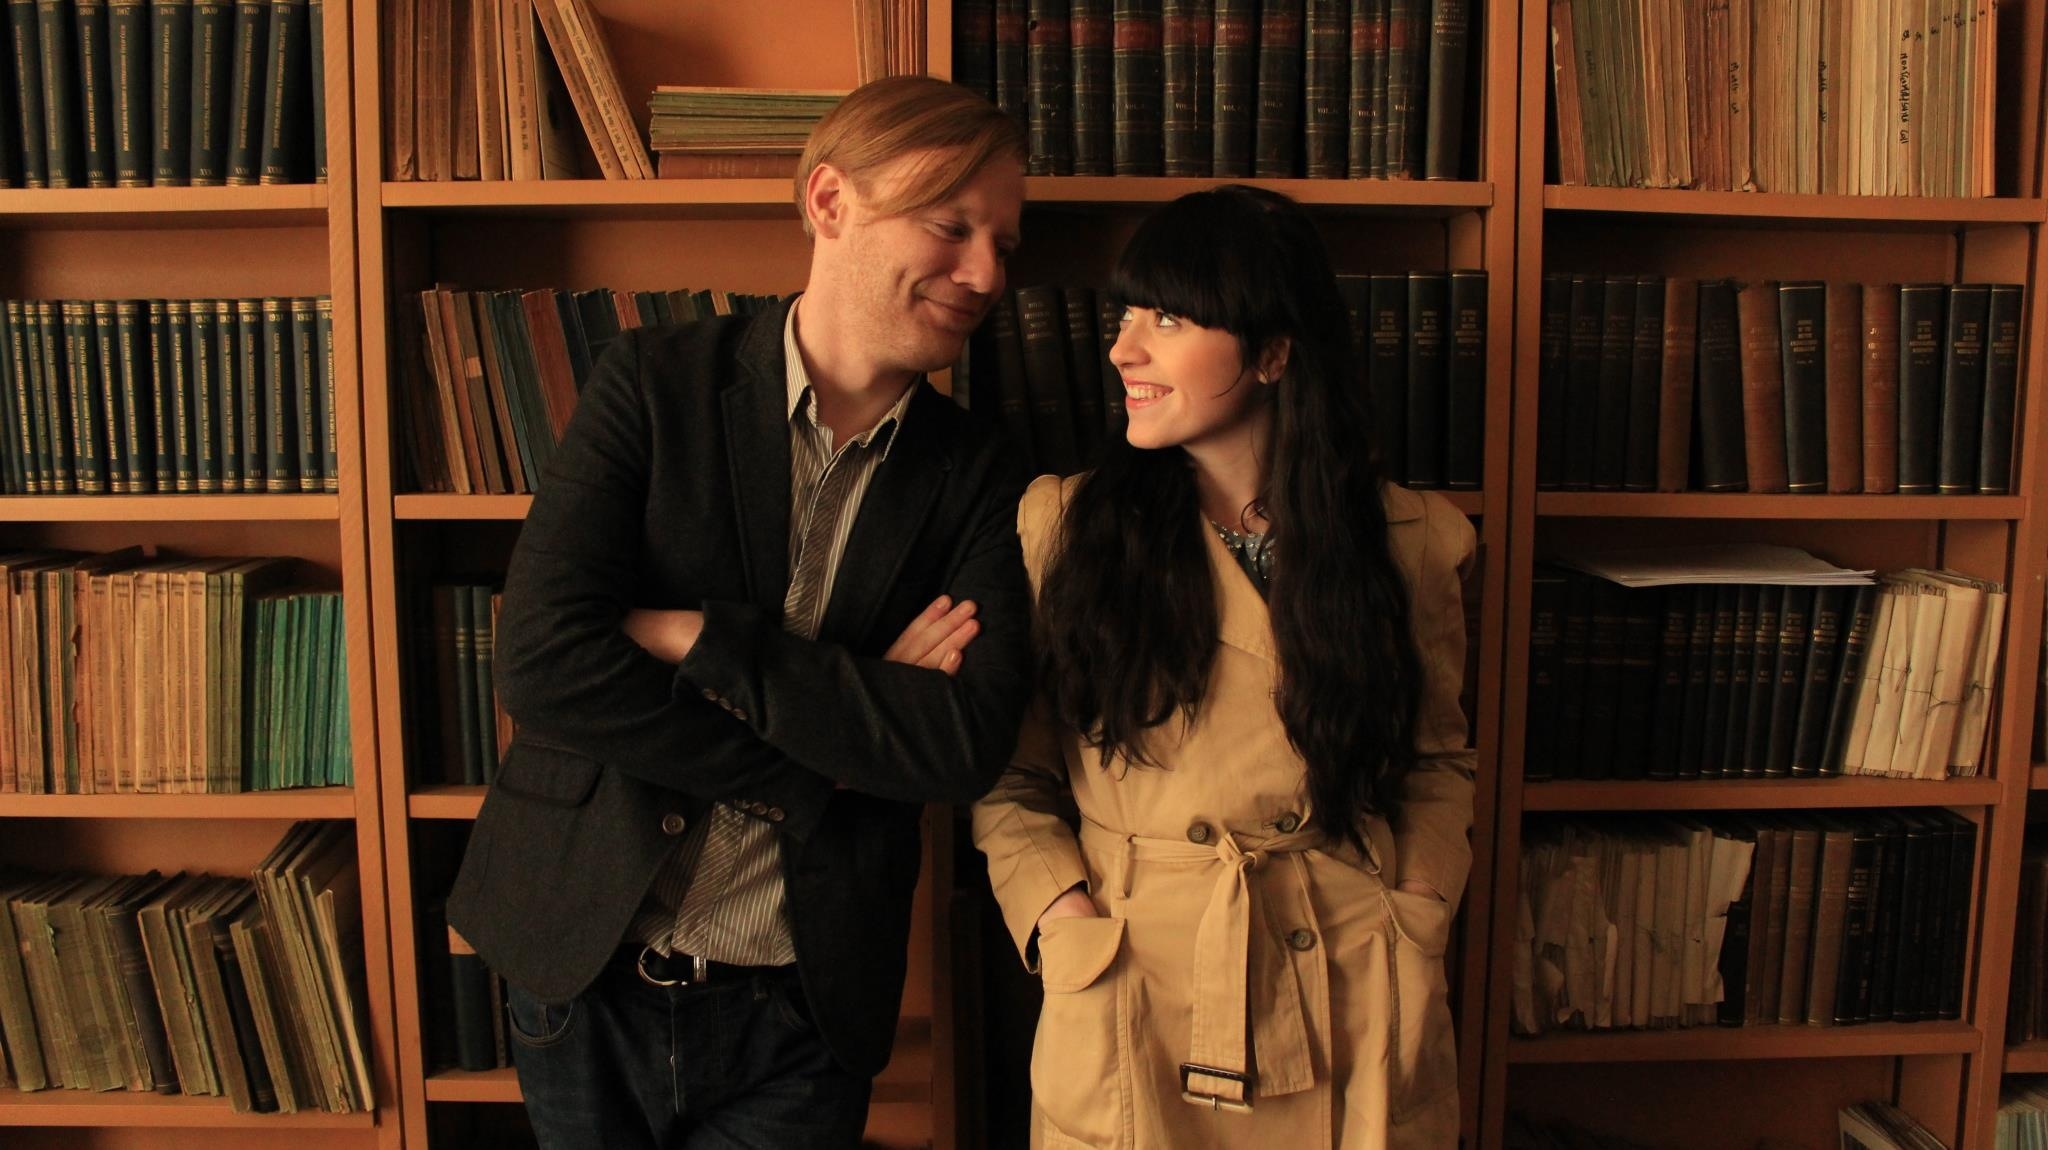 Brian Gleeson and Gemma-Leah Devereux in 